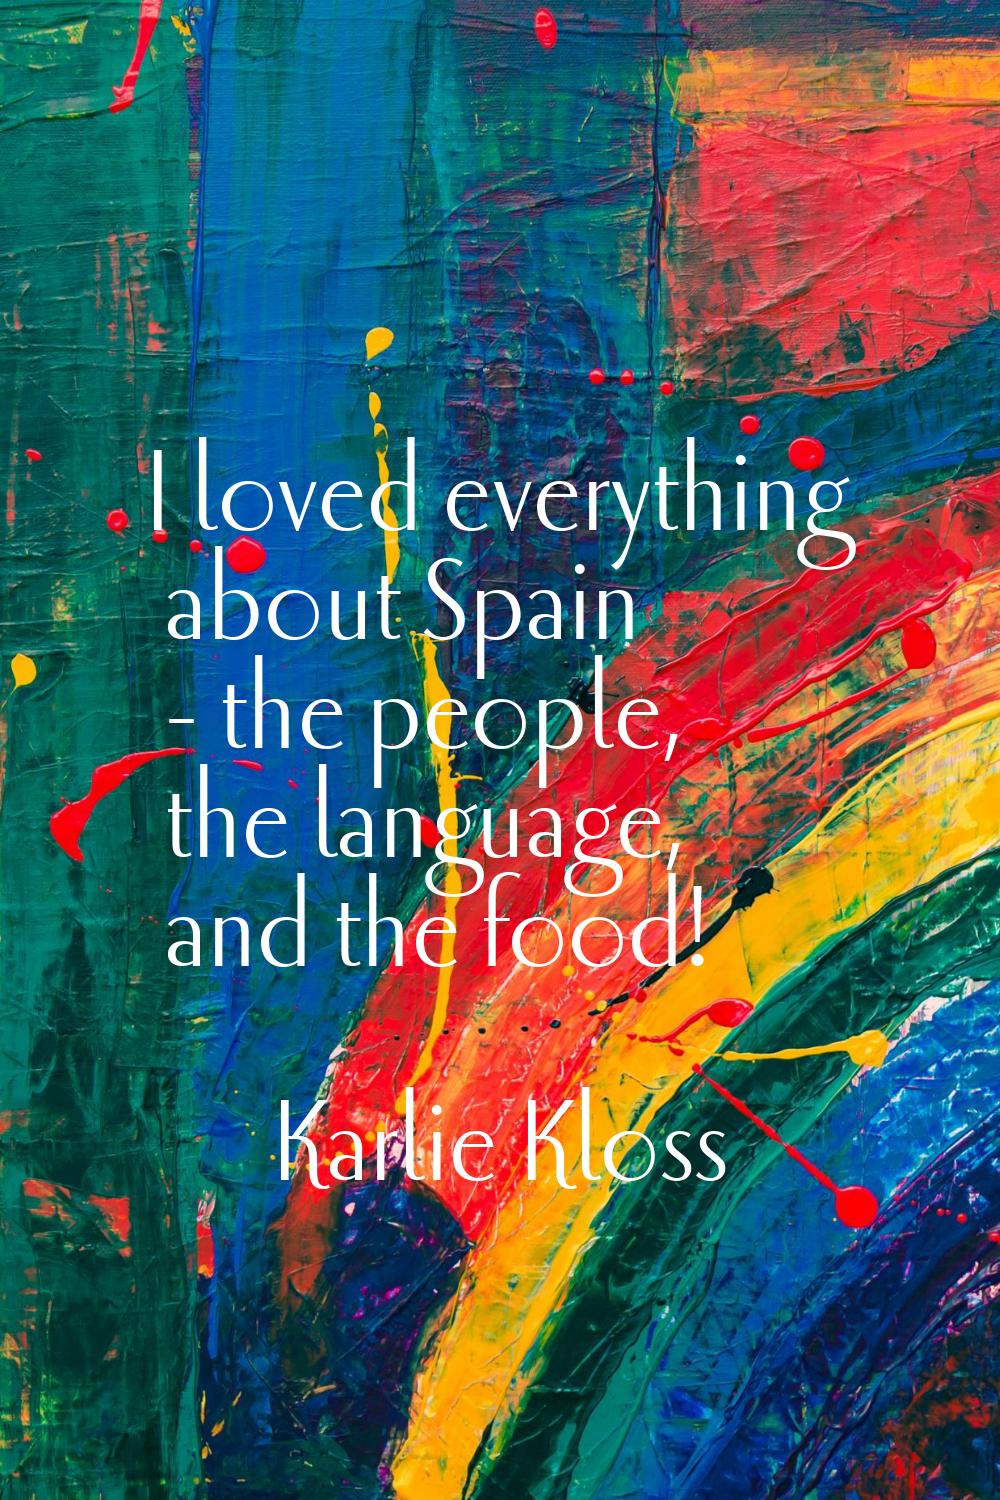 I loved everything about Spain - the people, the language, and the food!